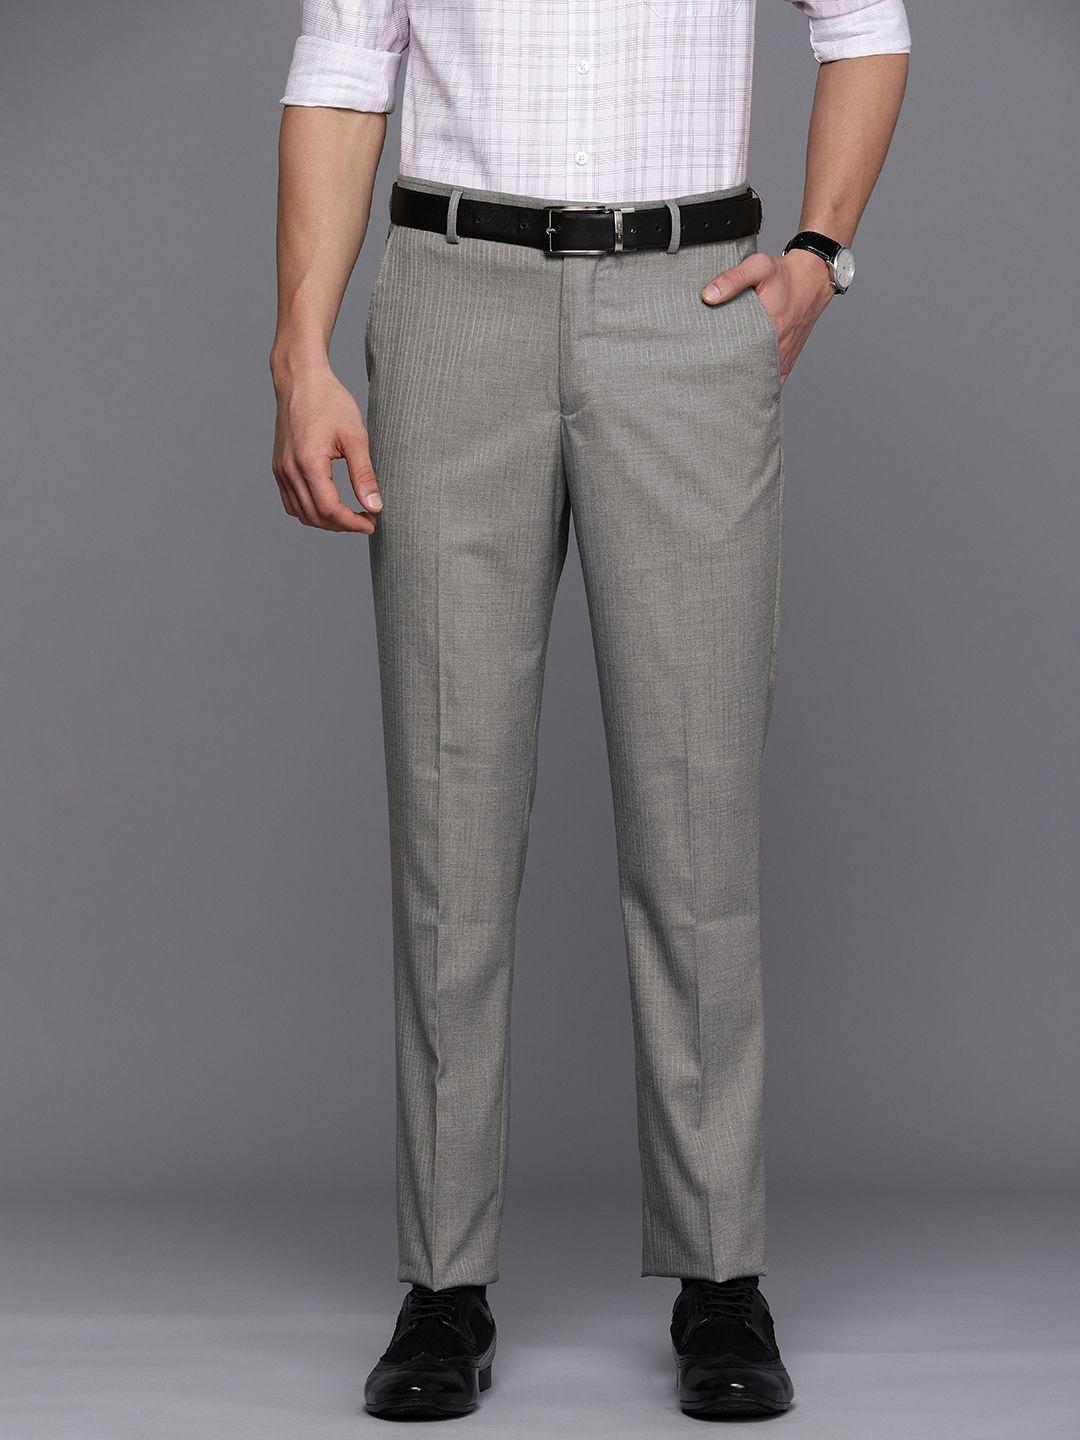 louis philippe men grey striped slim fit trousers